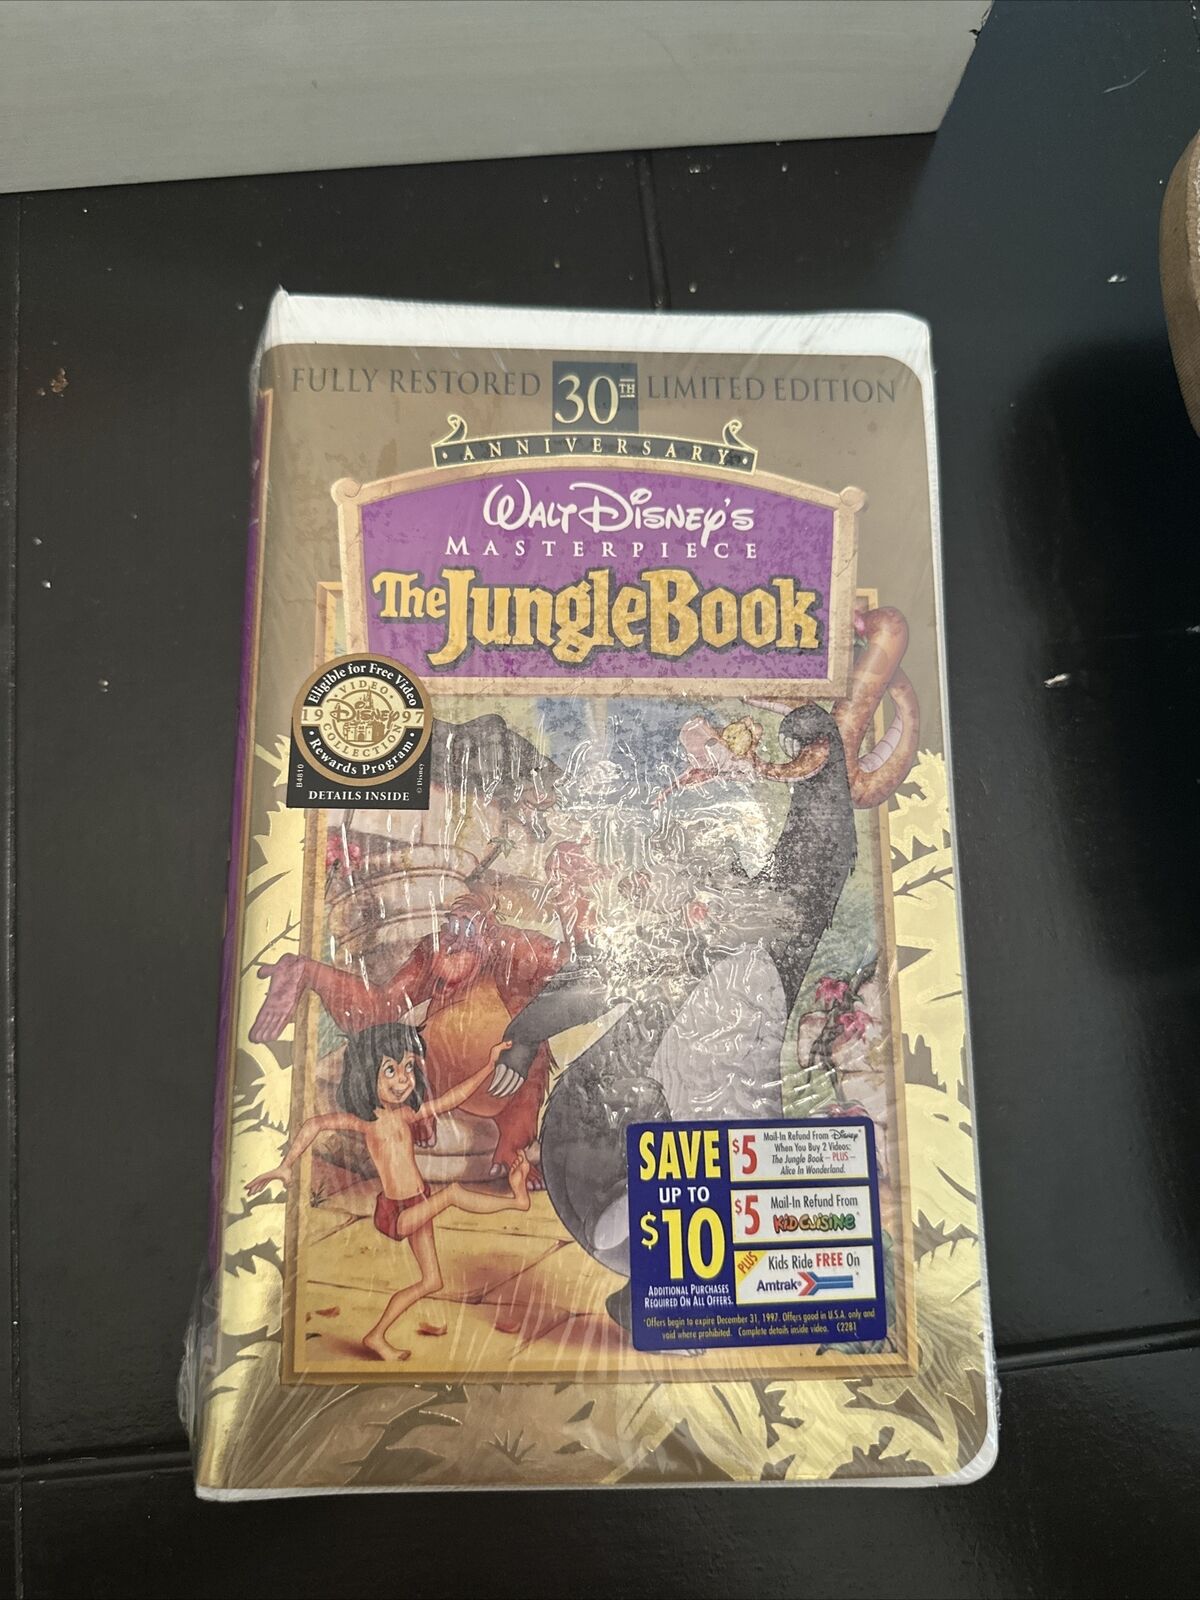 The Jungle Book VHS Masterpiece Collection 30th Limited Edition